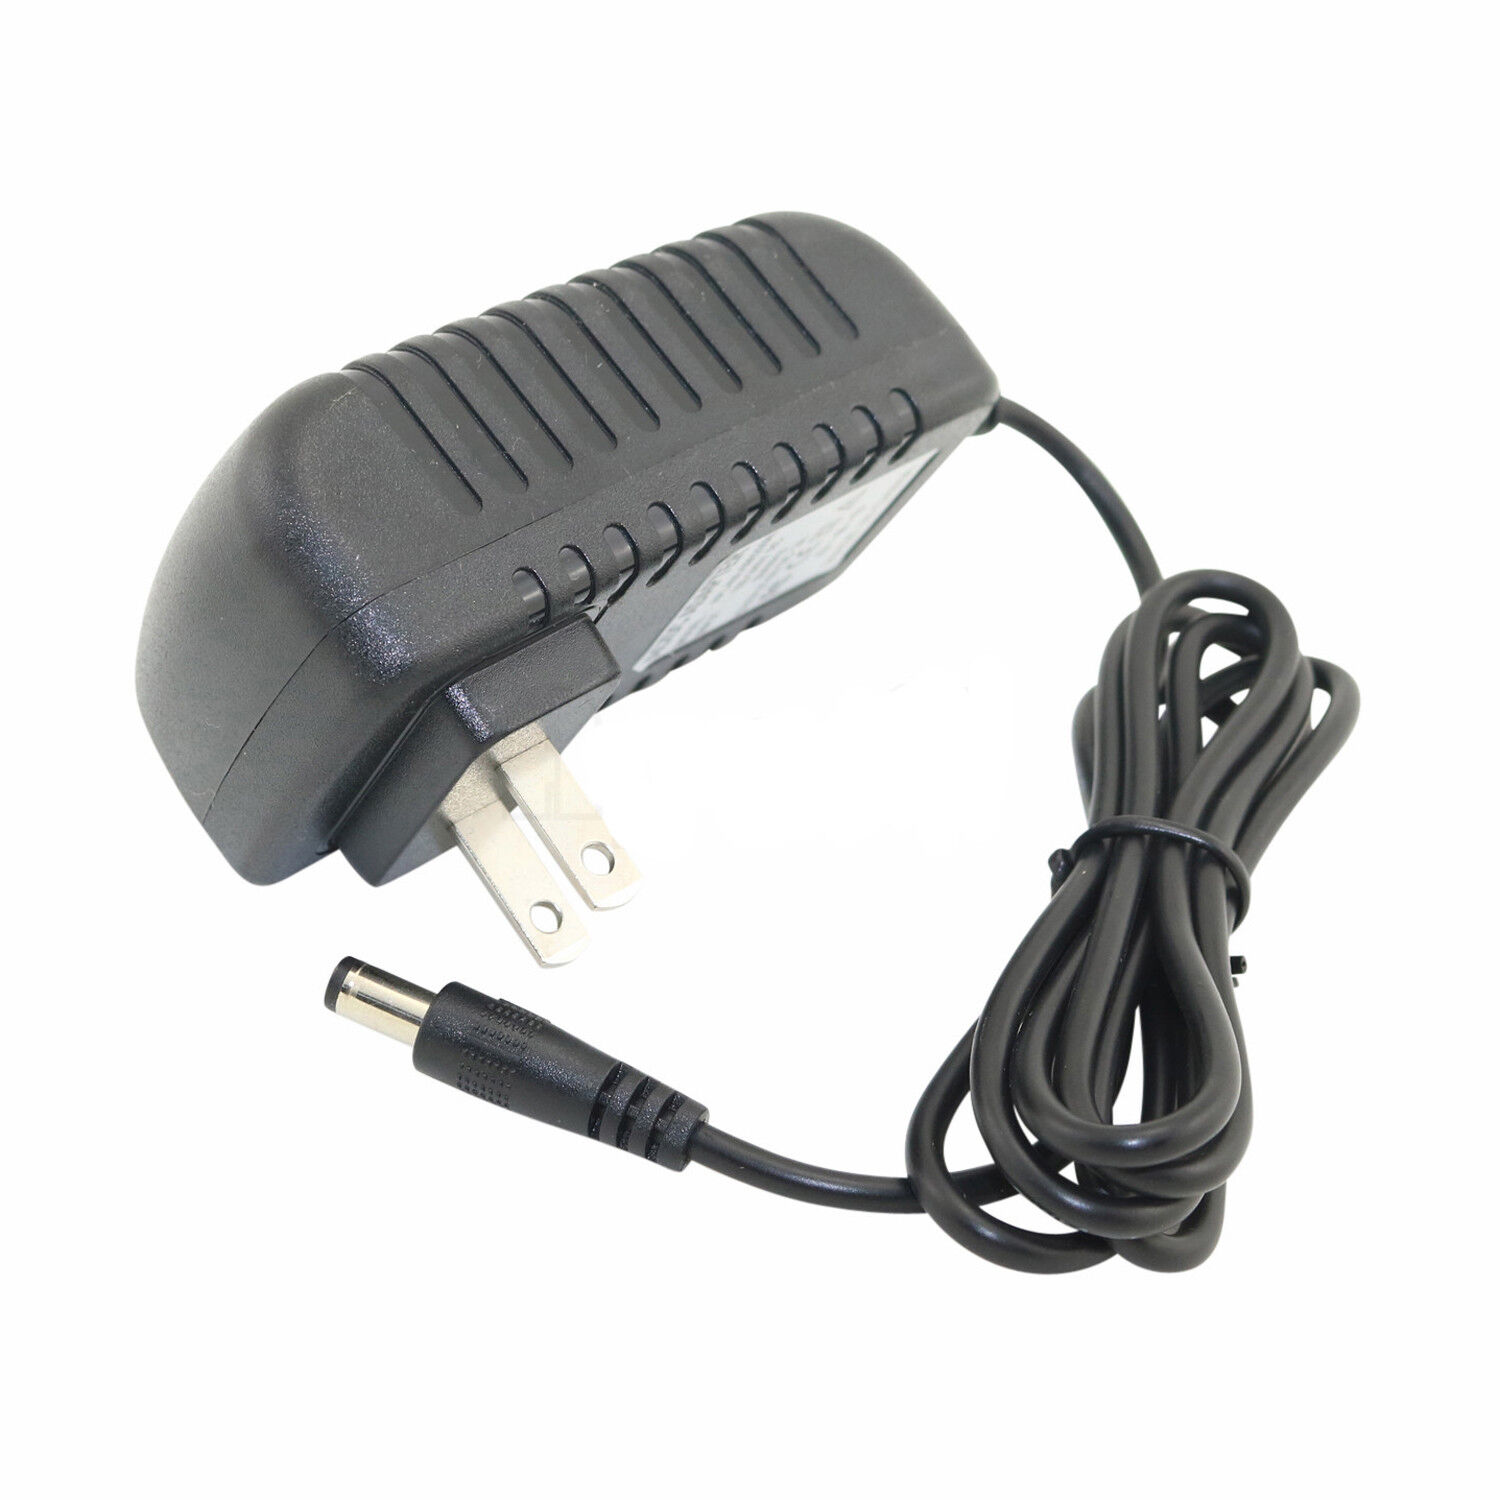 AC DC Charger Adapter for Bowflex Max Trainer M3 M5 M7 Power Supply Cord Mains Cable Length: 4ft./1.2M Color: Black Inp